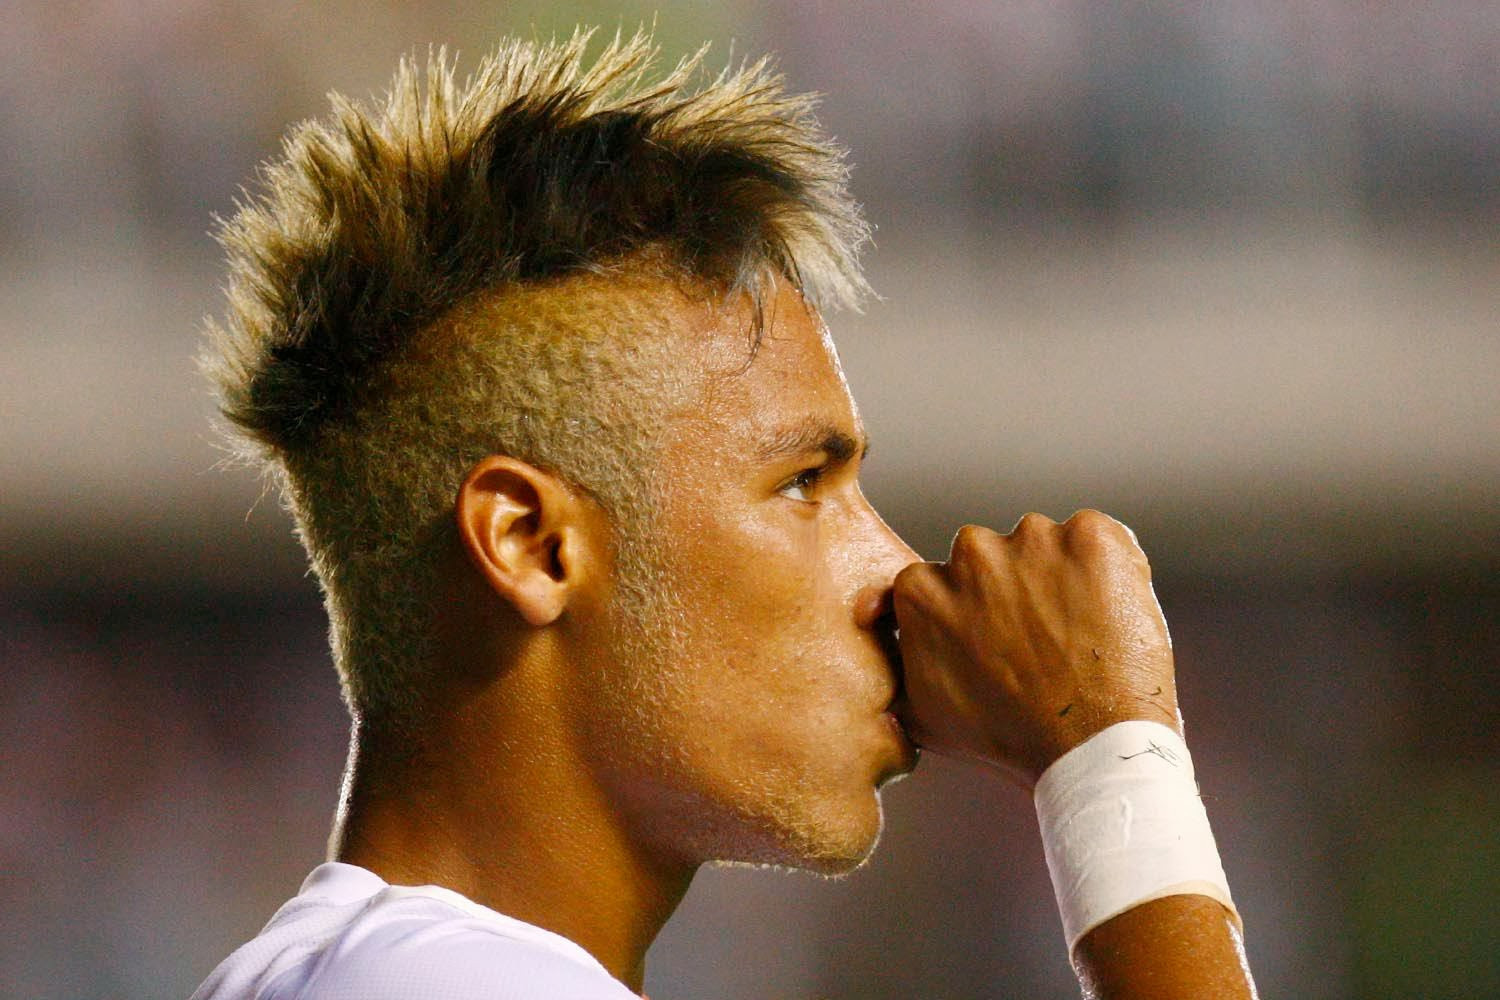 Mens Soccer Haircuts
 Soccer Player Hairstyles